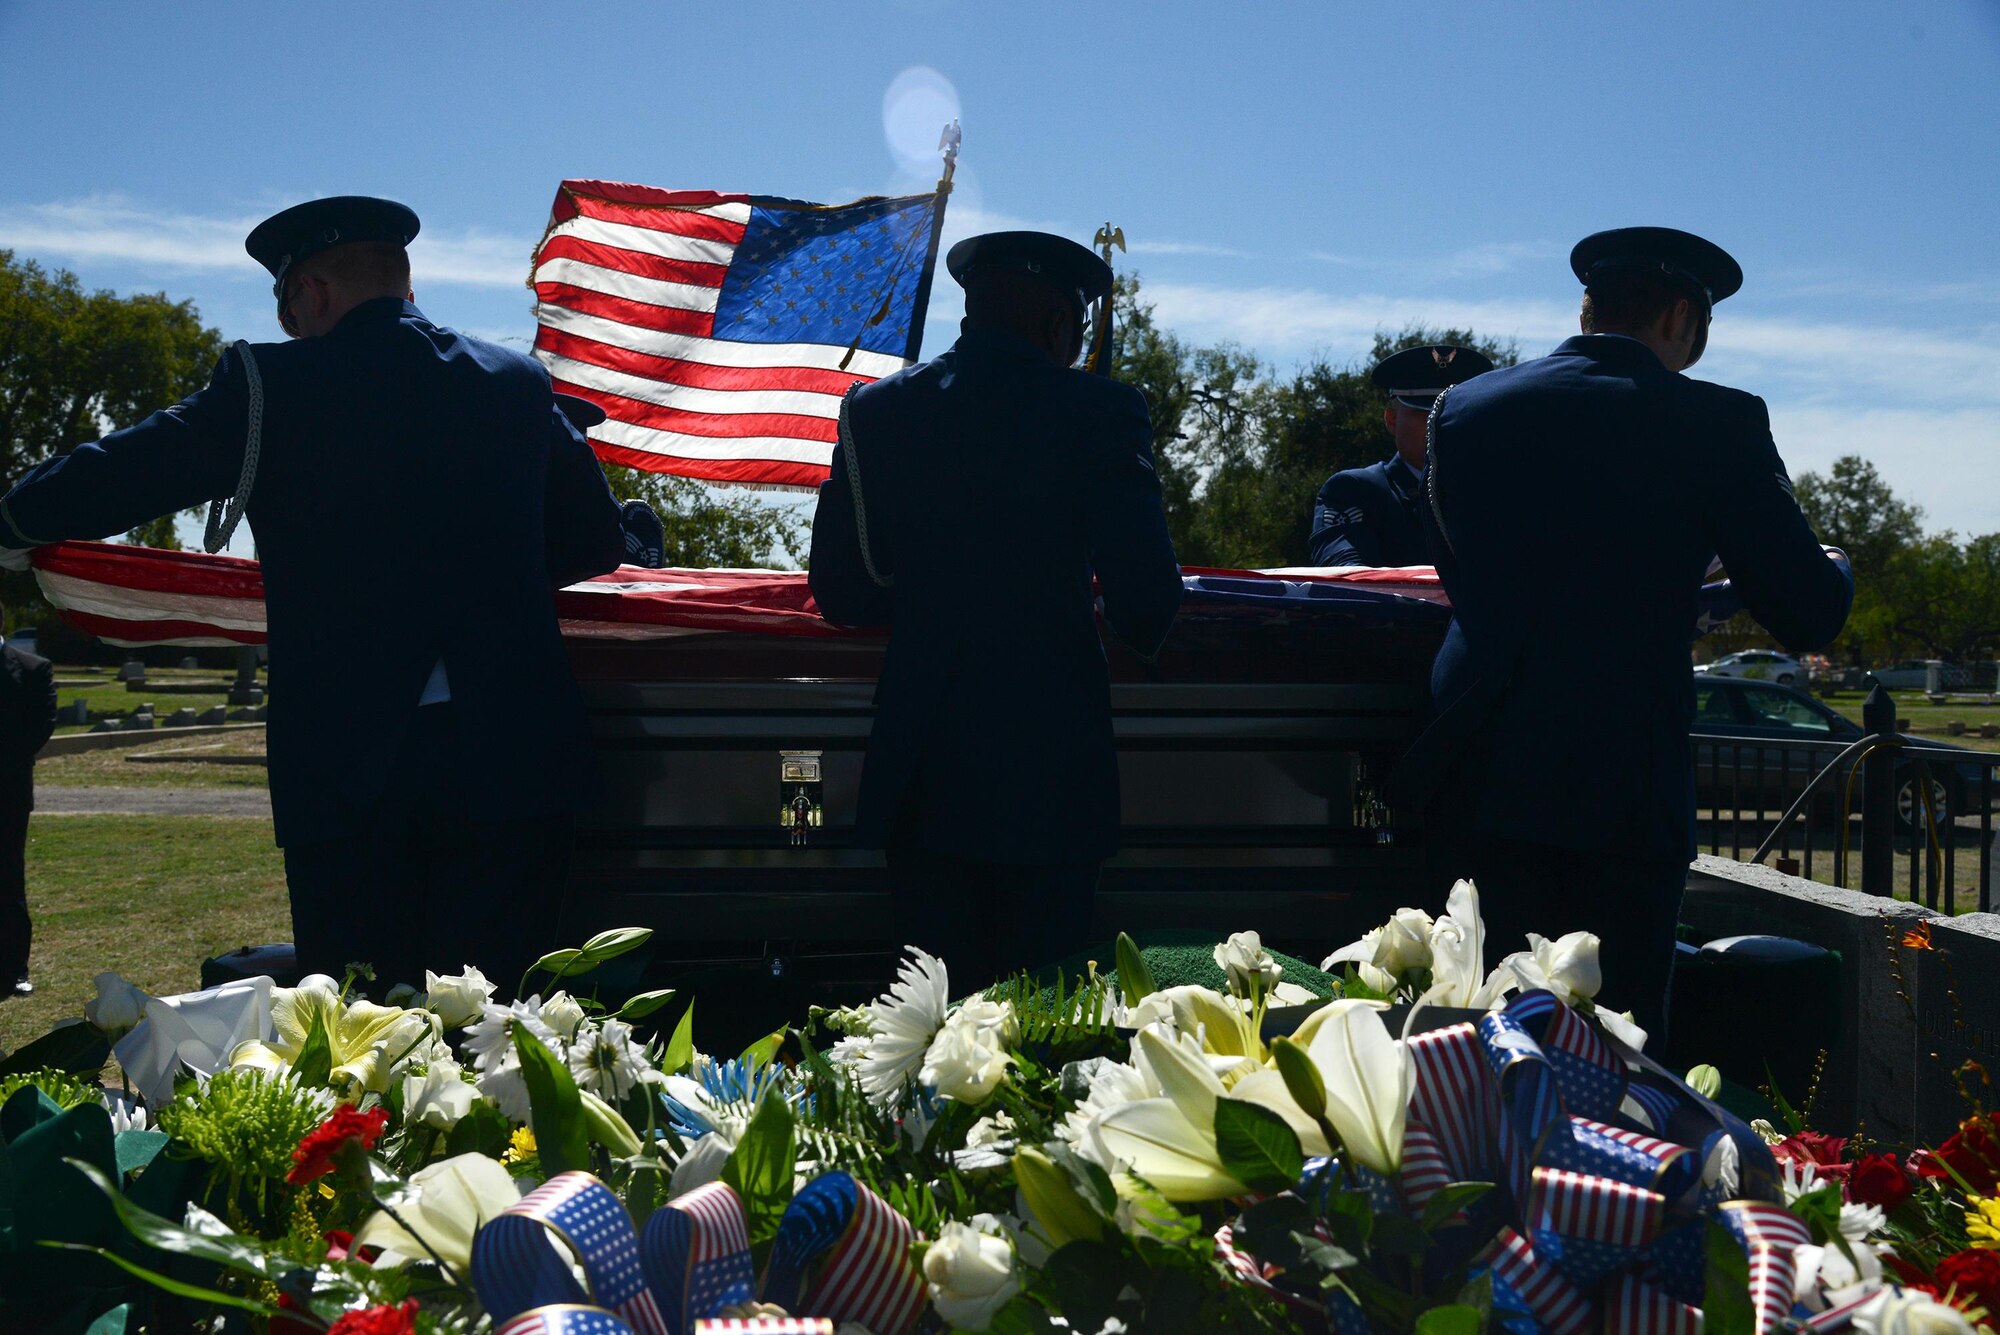 The Laughlin Honor Guard places the flag over retired Maj. Gen. Homer Lewis’s casket in Eagle Pass, Texas, on Oct. 29, 2015. Major General Homer I. "Pete" Lewis passed away peacefully at his home in Eagle Pass, Texas, Oct. 21, 2015 at the age of 96. His military decorations and awards include the Legion of Merit, Air Medal and the Air Force Outstanding Unit Award Ribbon. (U.S. Air Force photo by Airman 1st Class Brandon May)(Released)